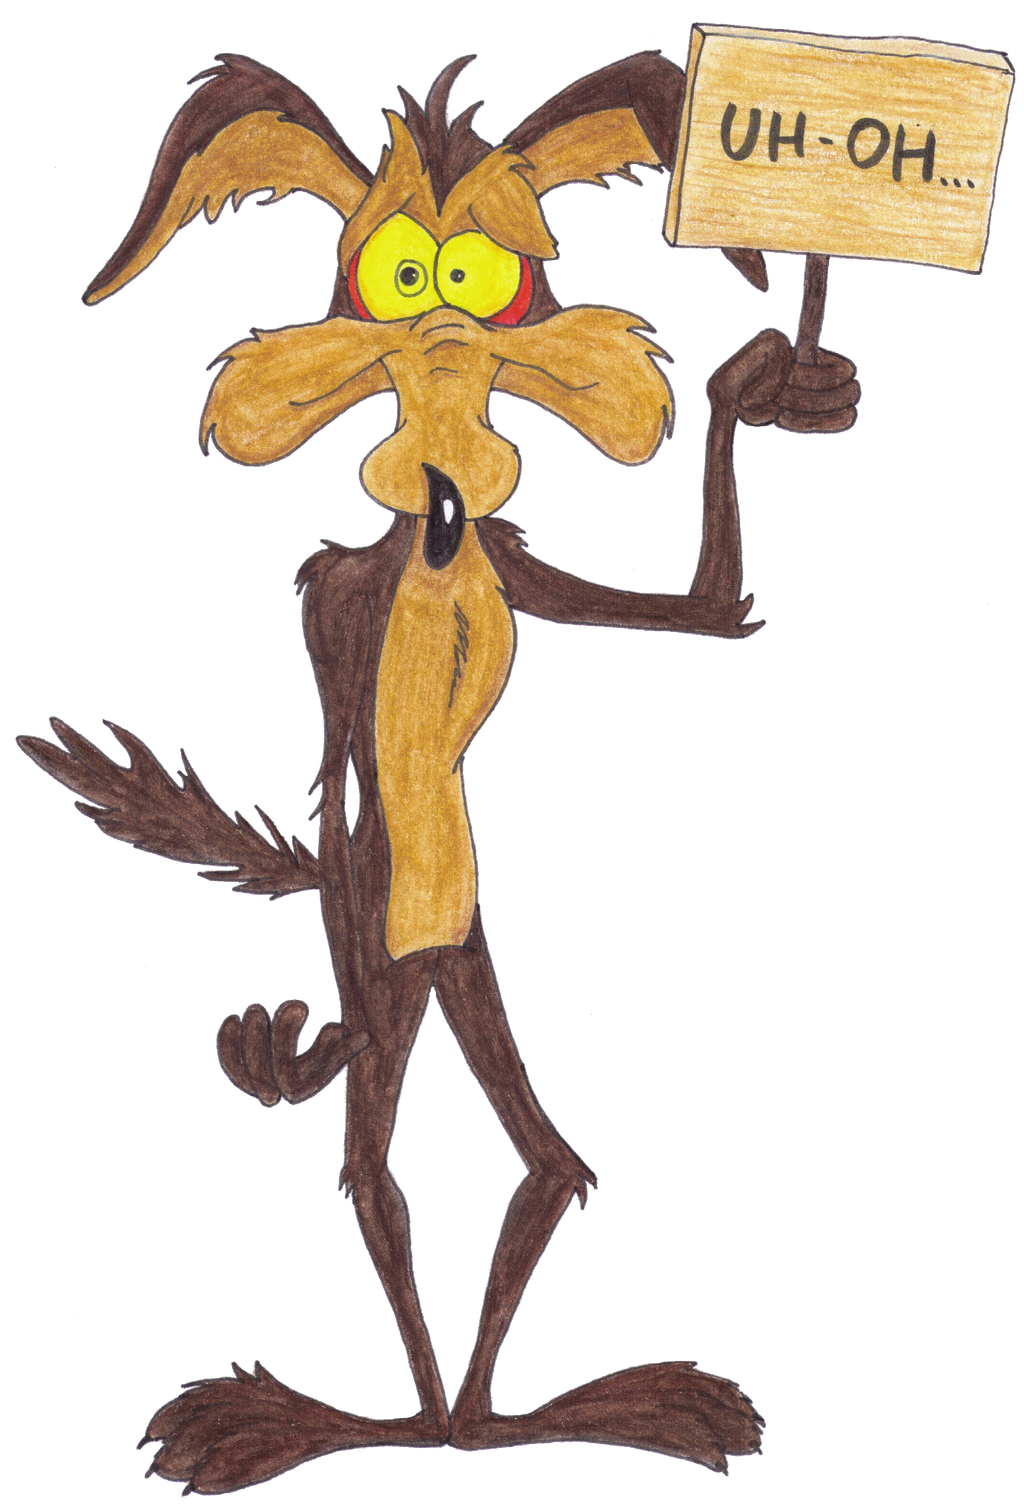 Wile E. Coyote Classic Cartoon Network Collab by MoonyMina on DeviantArt